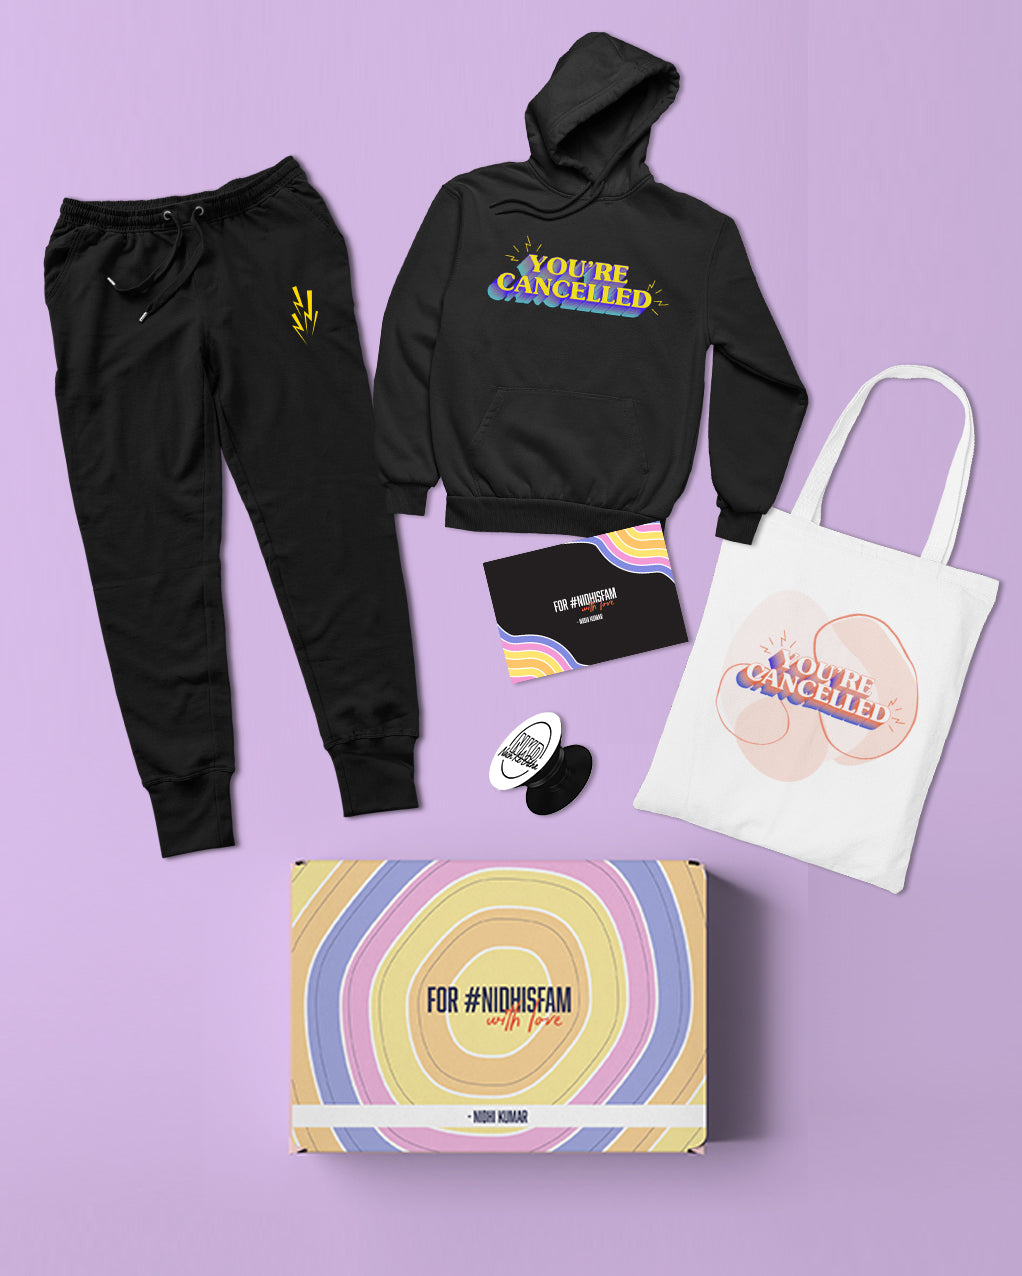 Your're cancelled Hoodie Fanbox